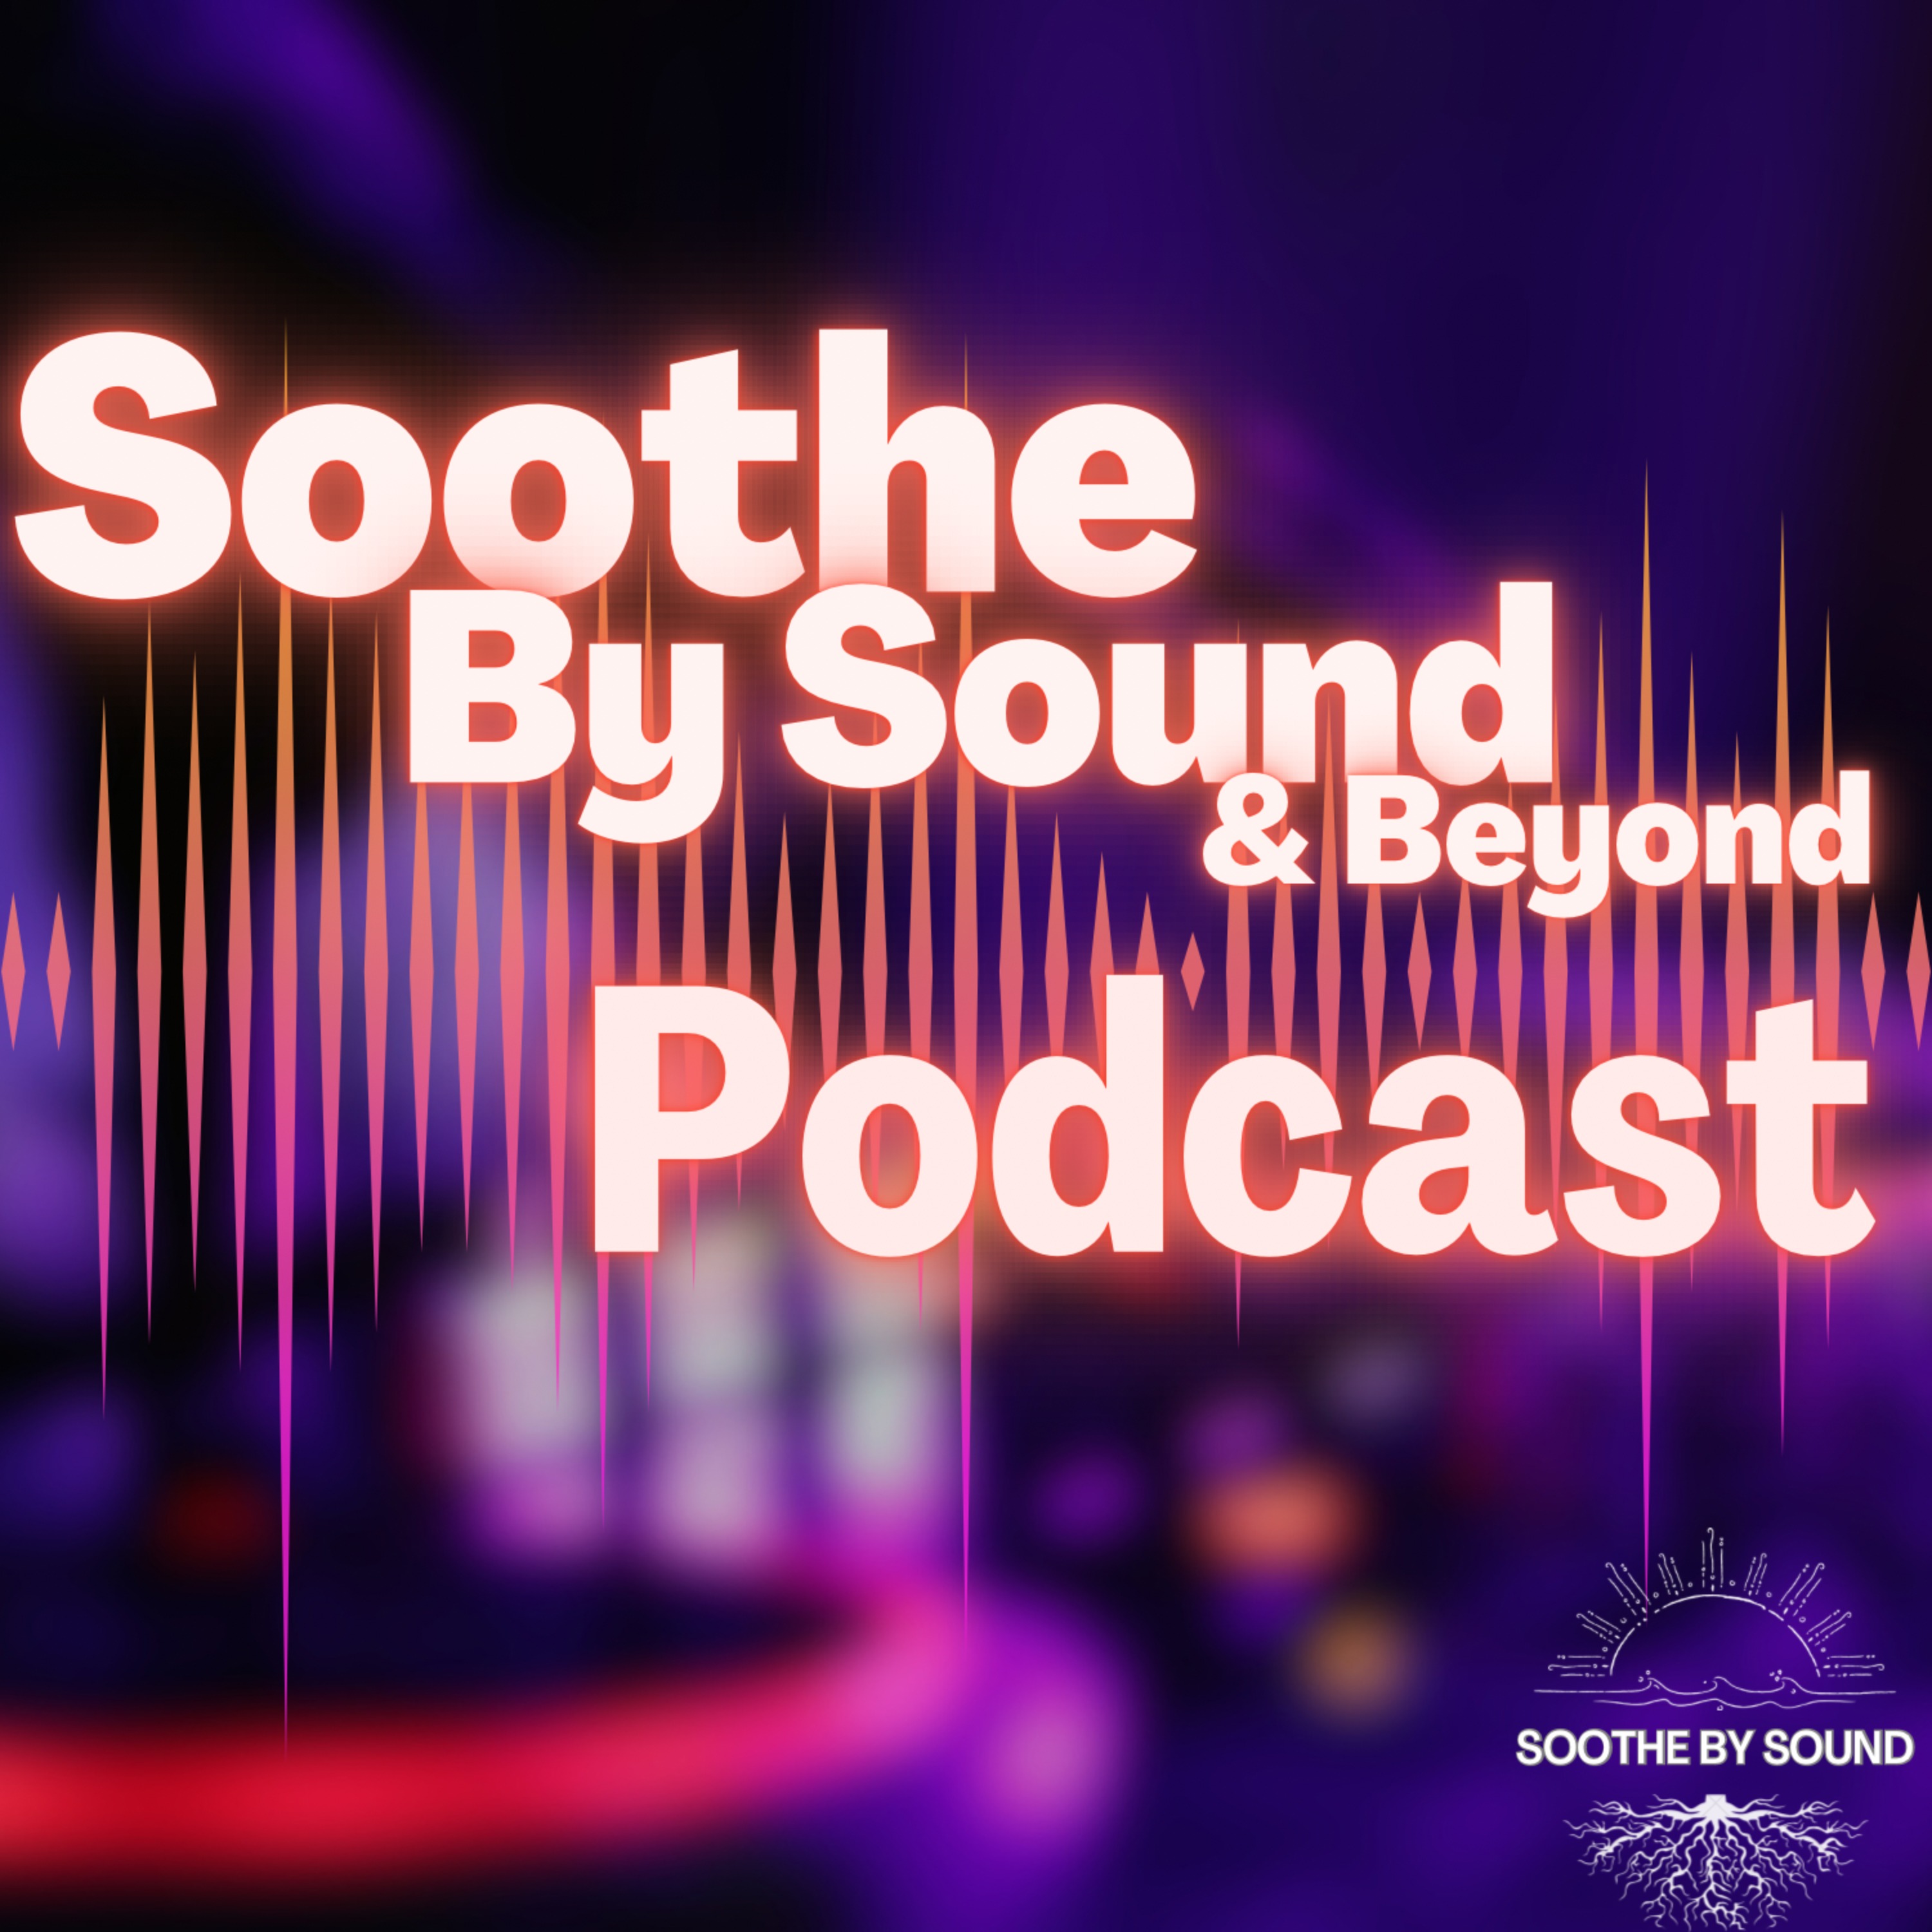 Soothe By Sound & Beyond Podcast:  Episode 12